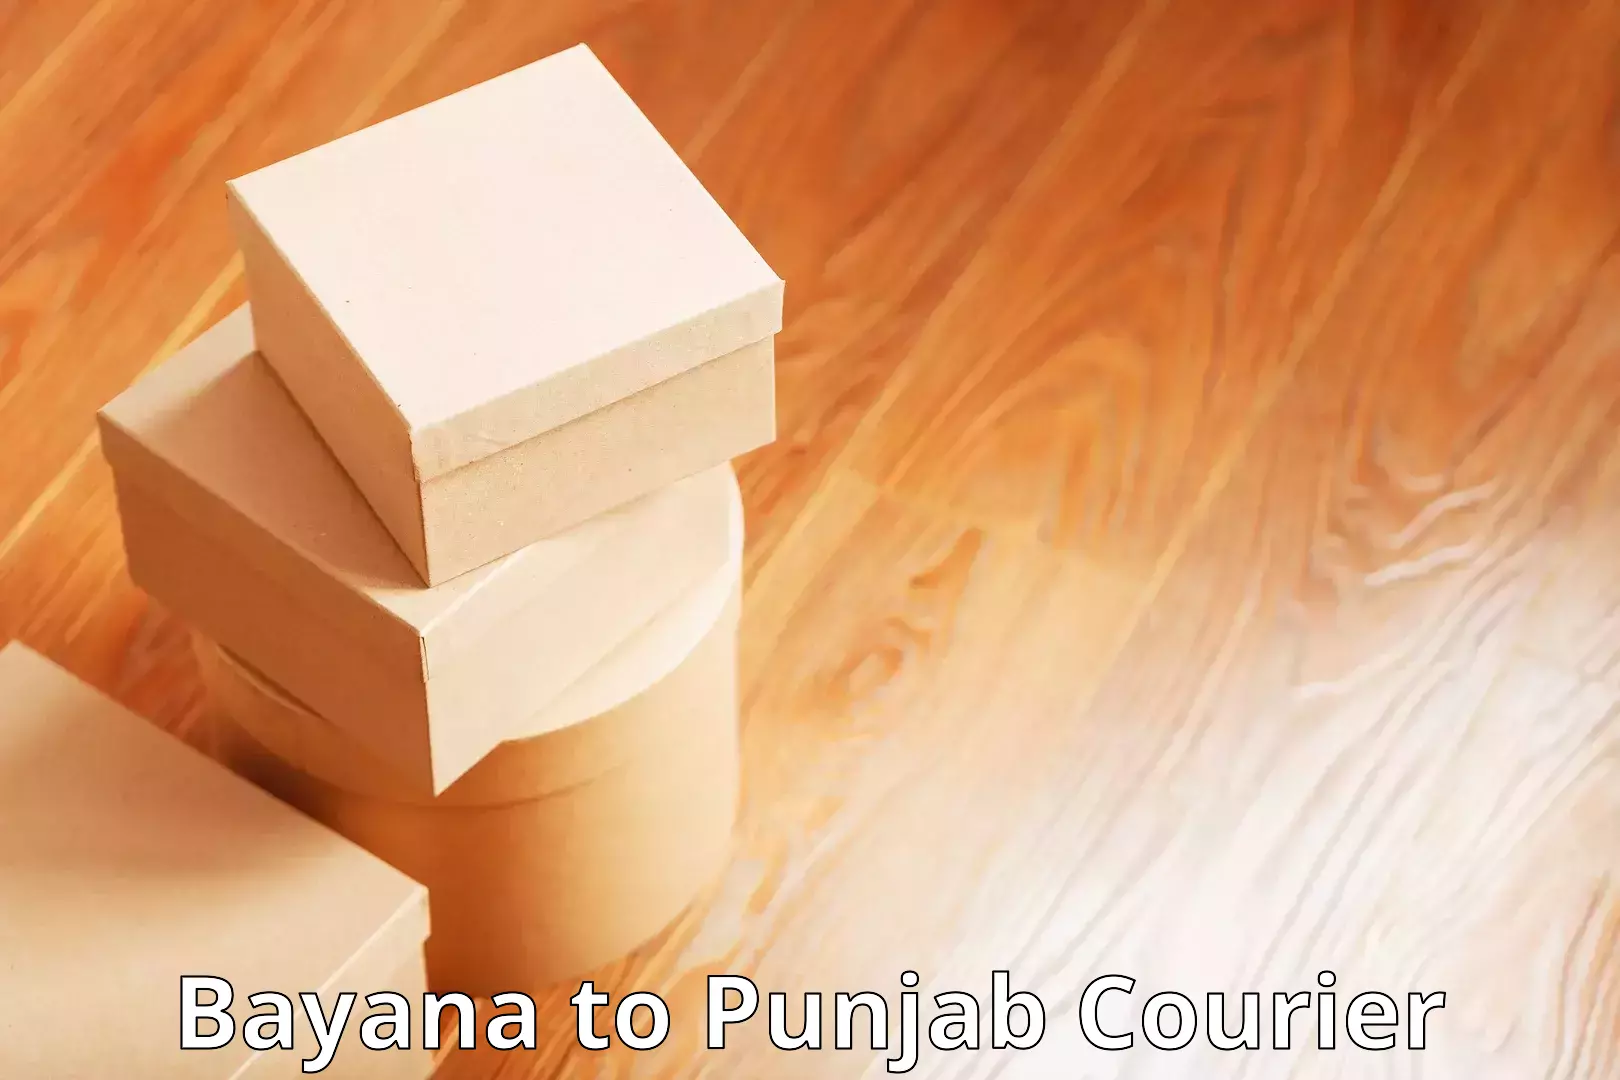 Express delivery network Bayana to Punjab